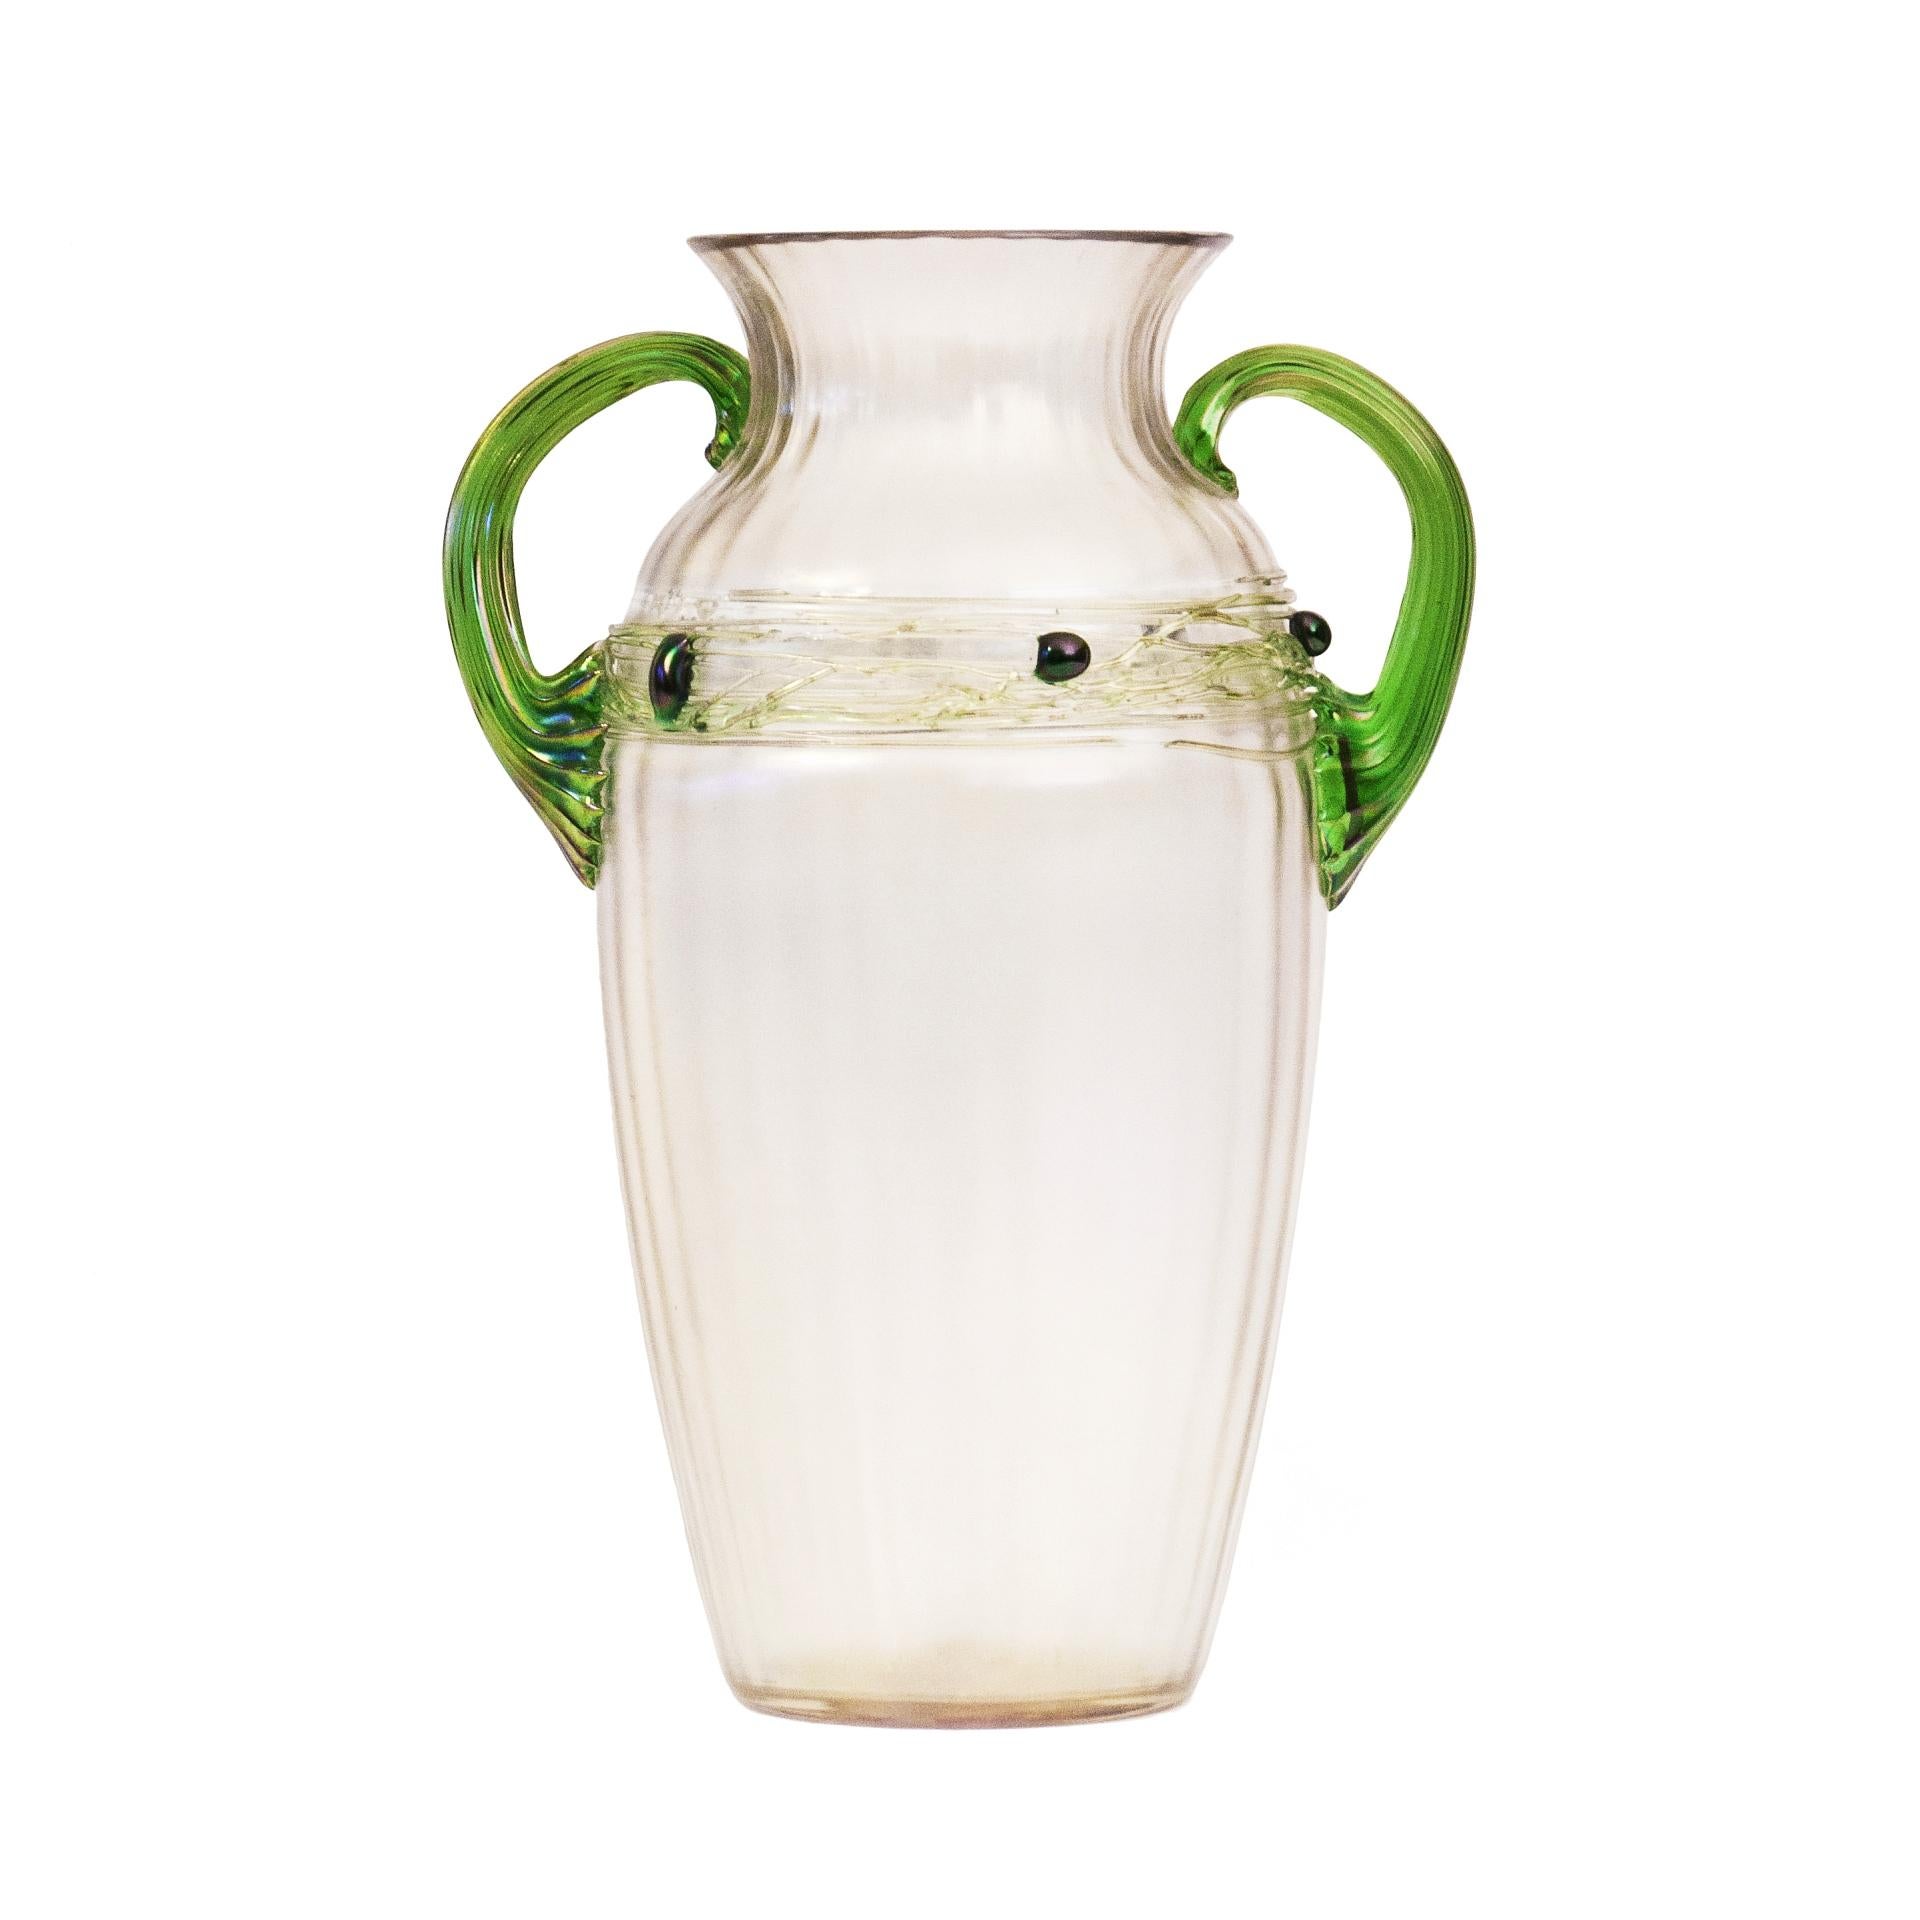 This is a sophisticated example of an iridescent vase by Wilhelm Kralik, one of Art Nouveau’s most eminent glasswork labels. The products of this company were characterised by original design, experimenting with texture and high-quality